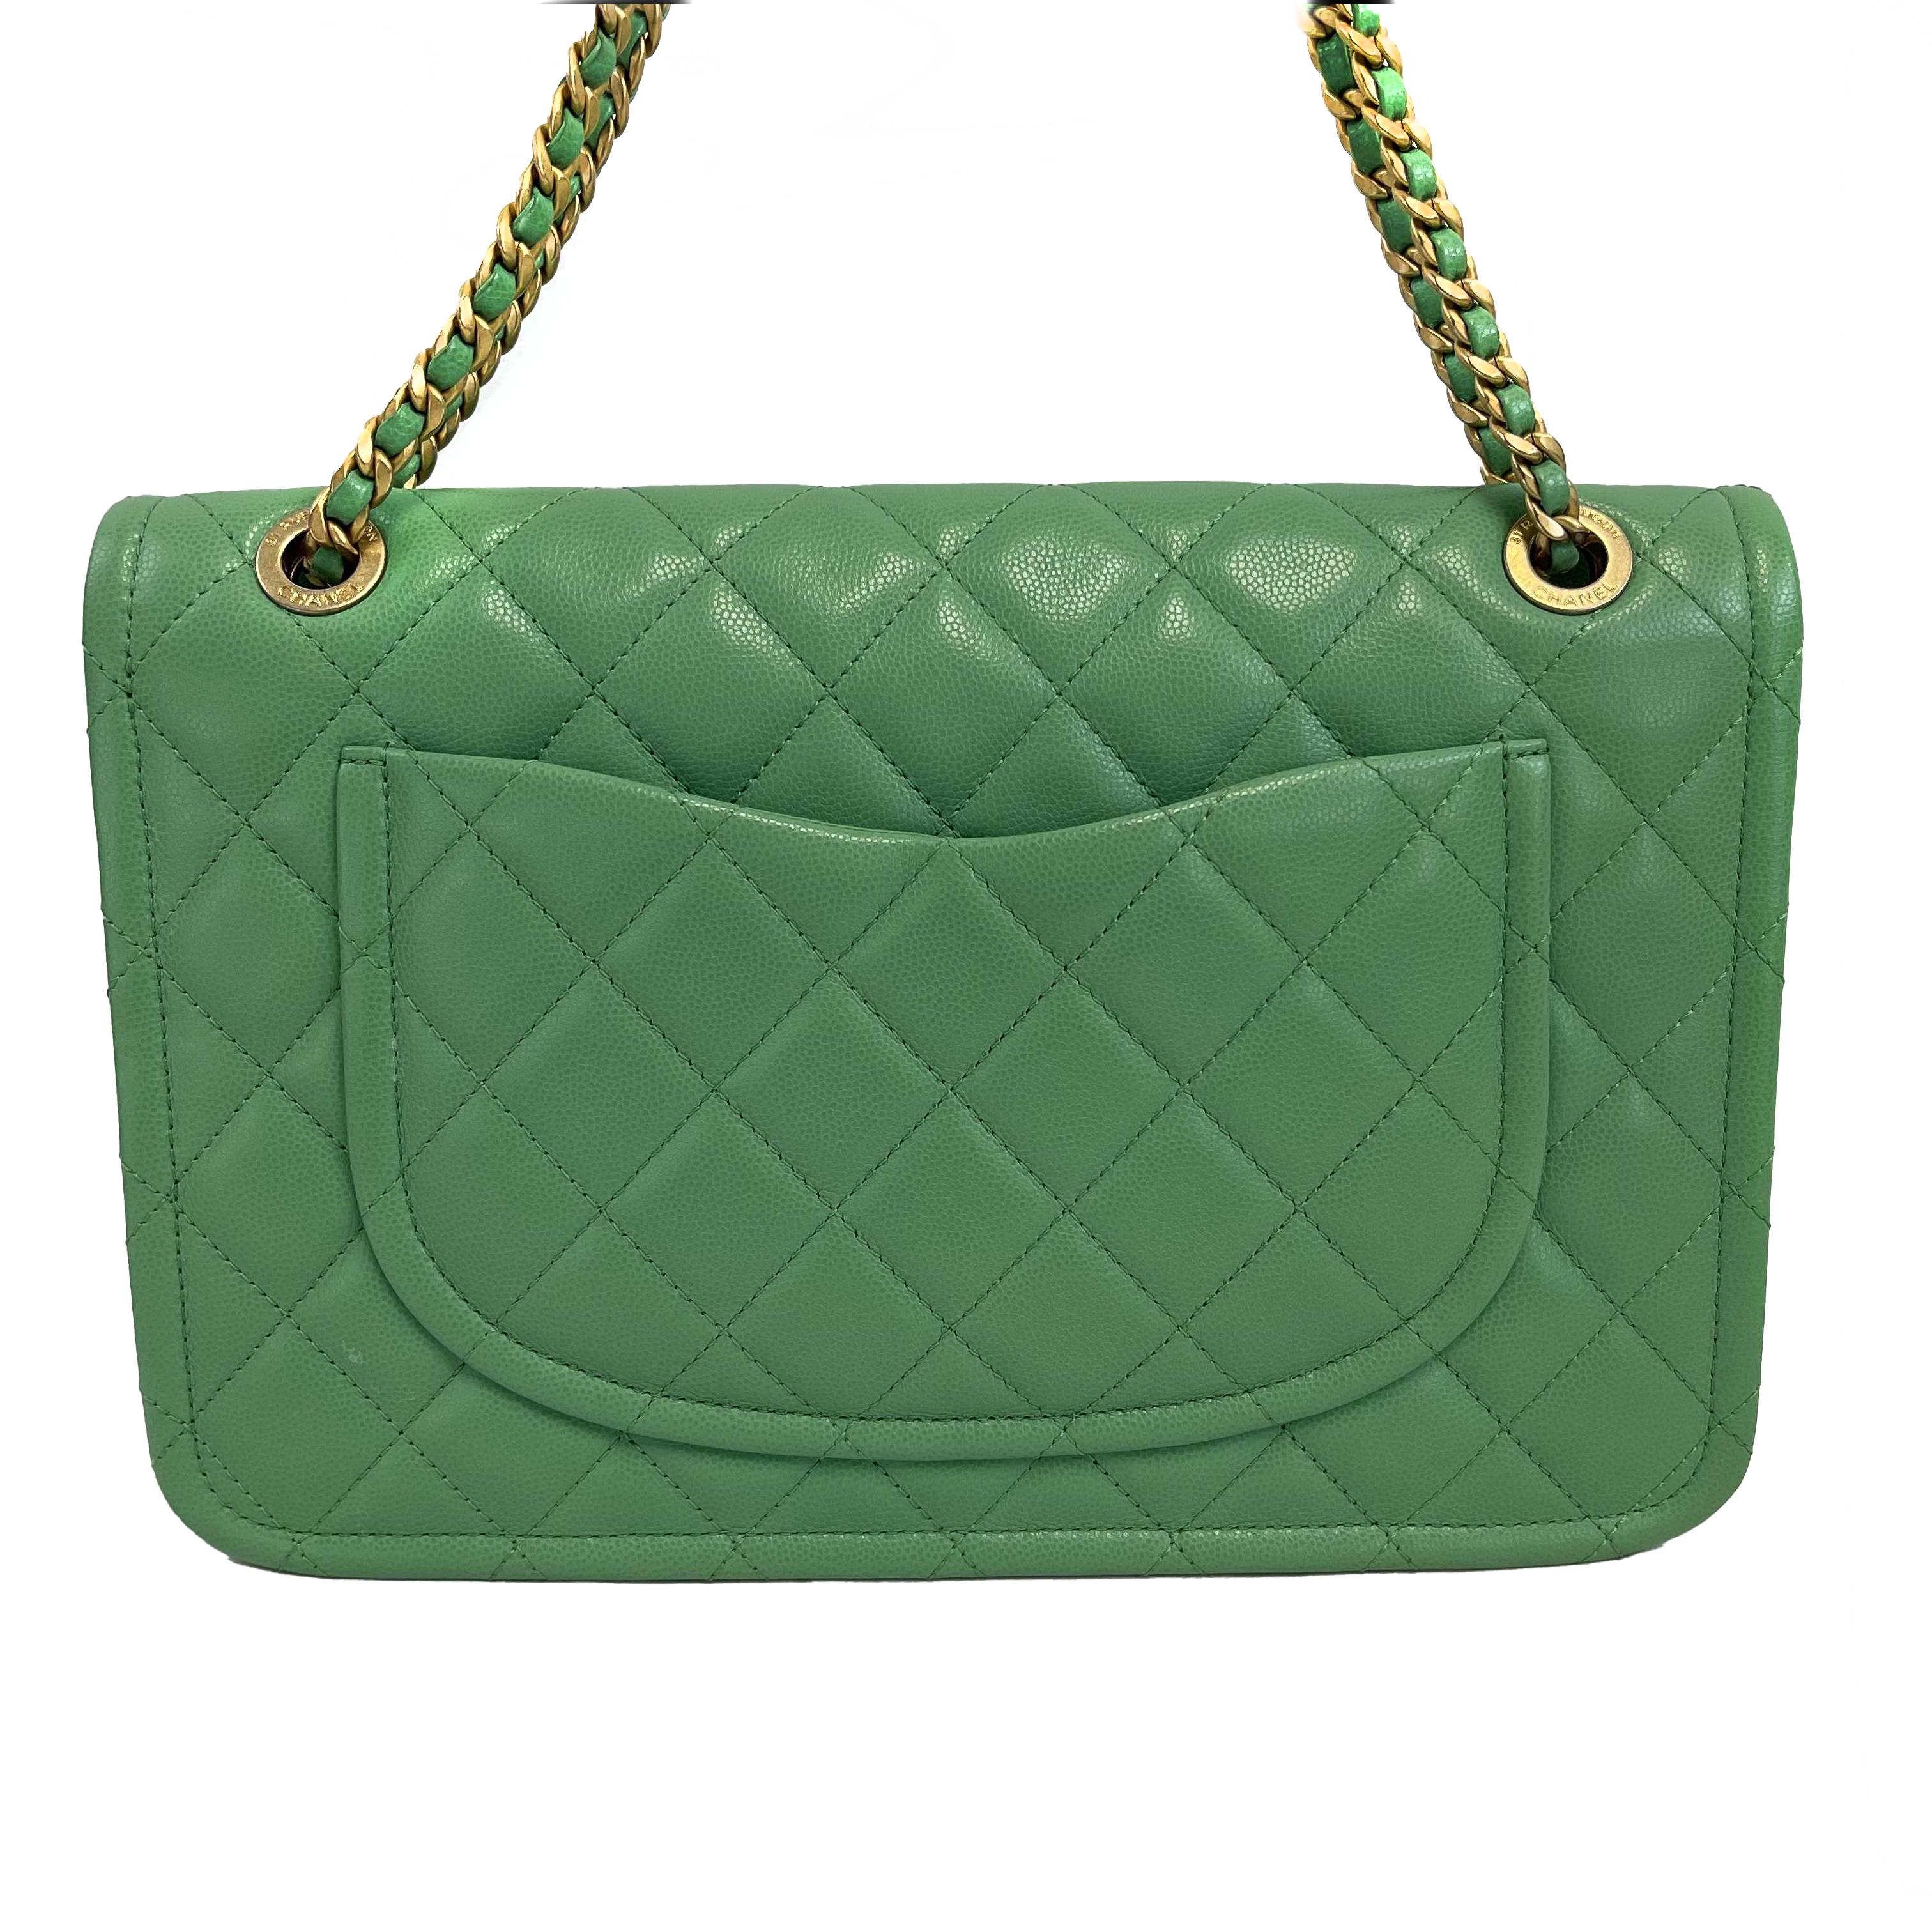 CHANEL - 2021 CC Medium Diamond Caviar Leather Mint Green Sweet Single Flap

Description

Shoulder bag
Diamond quilted caviar leather in Mint green
Gold chain link shoulder straps threaded with mint leather
Front flap
Polished gold Chanel CC turn